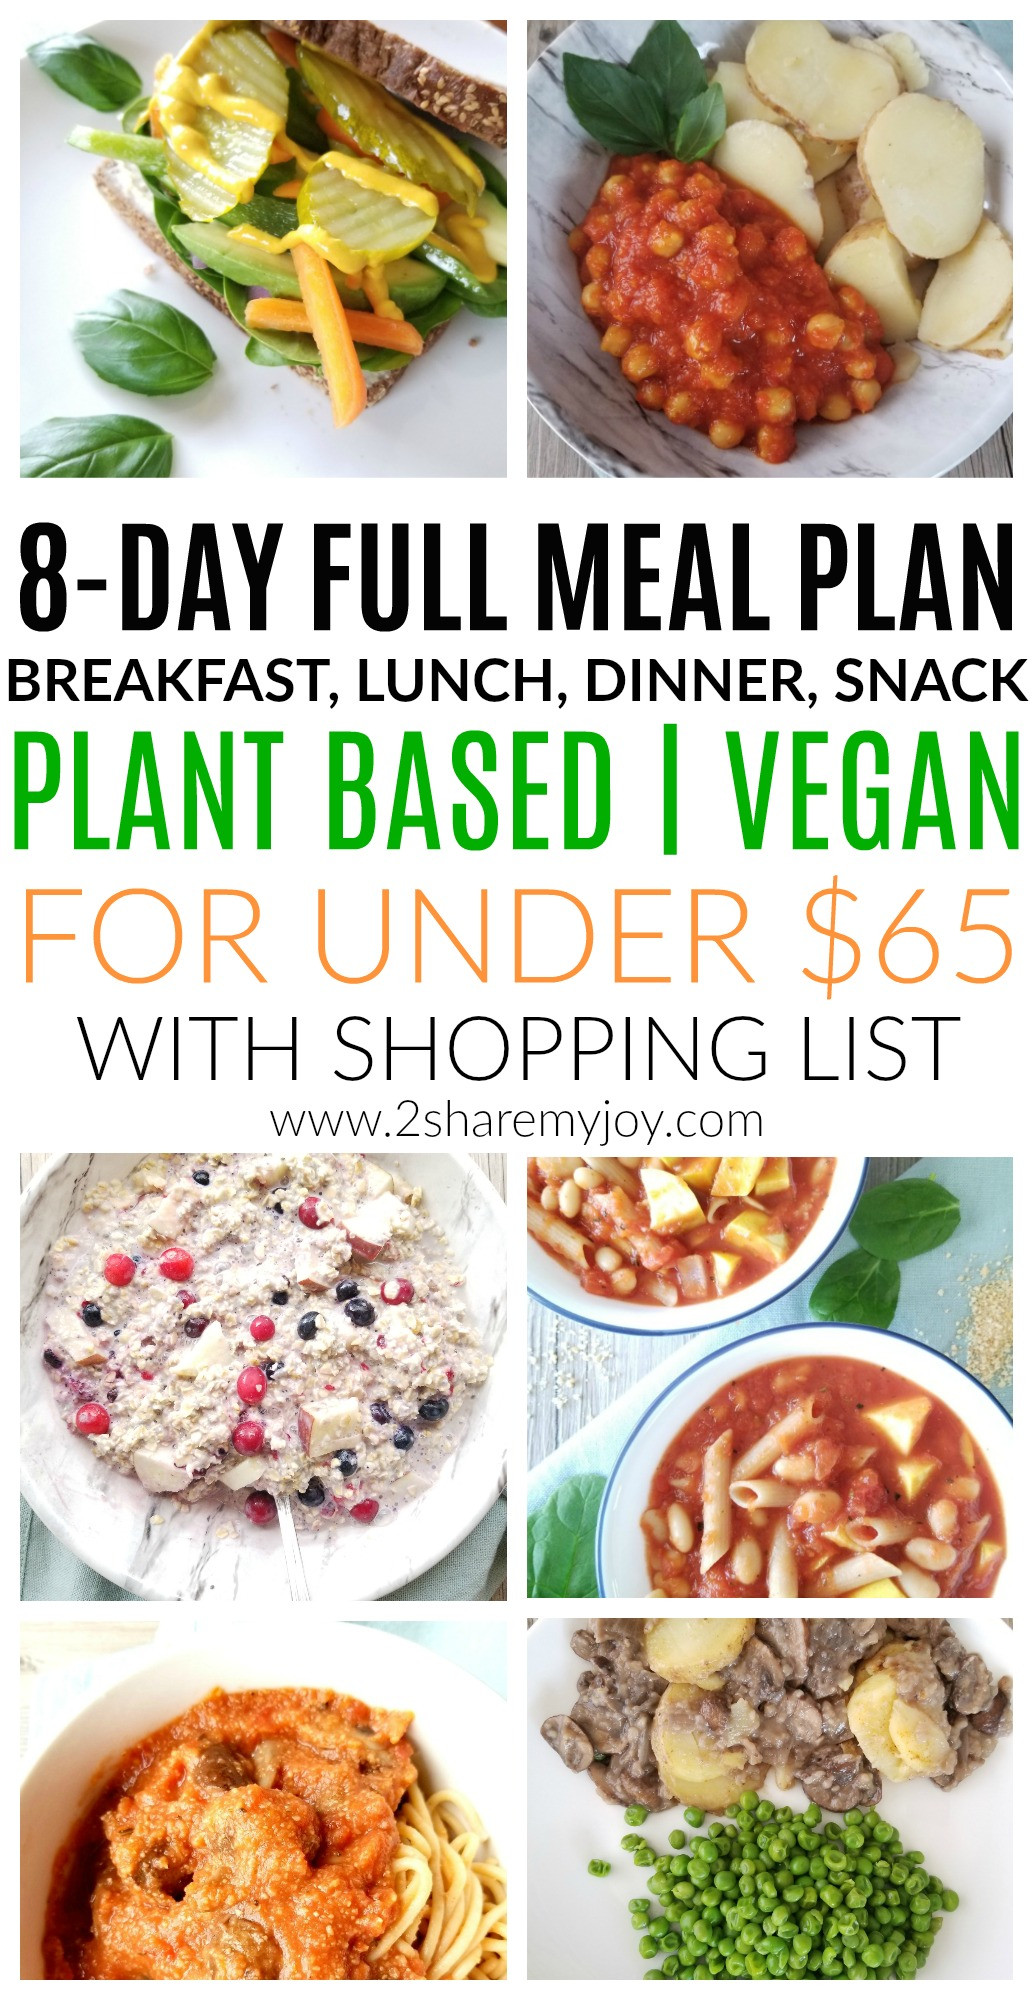 Plant Based Diet Meal Plan Shopping Lists
 8 Day Plant Based Meal Plan on A Bud 2 MyJoy